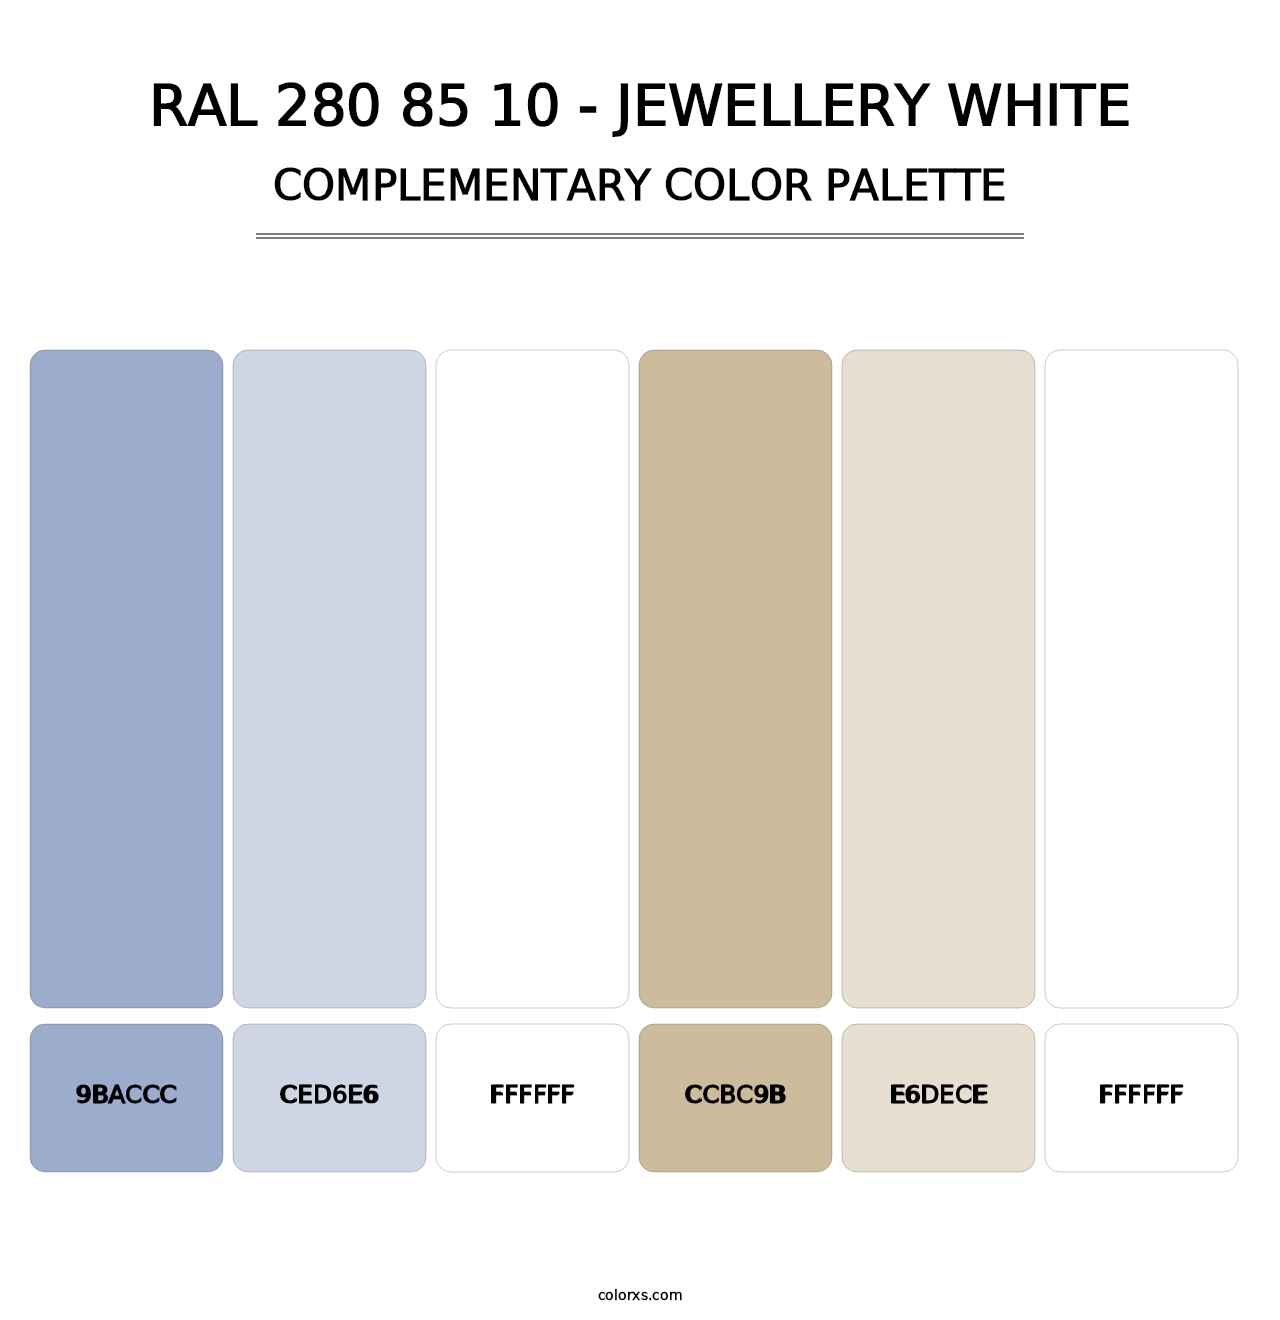 RAL 280 85 10 - Jewellery White - Complementary Color Palette